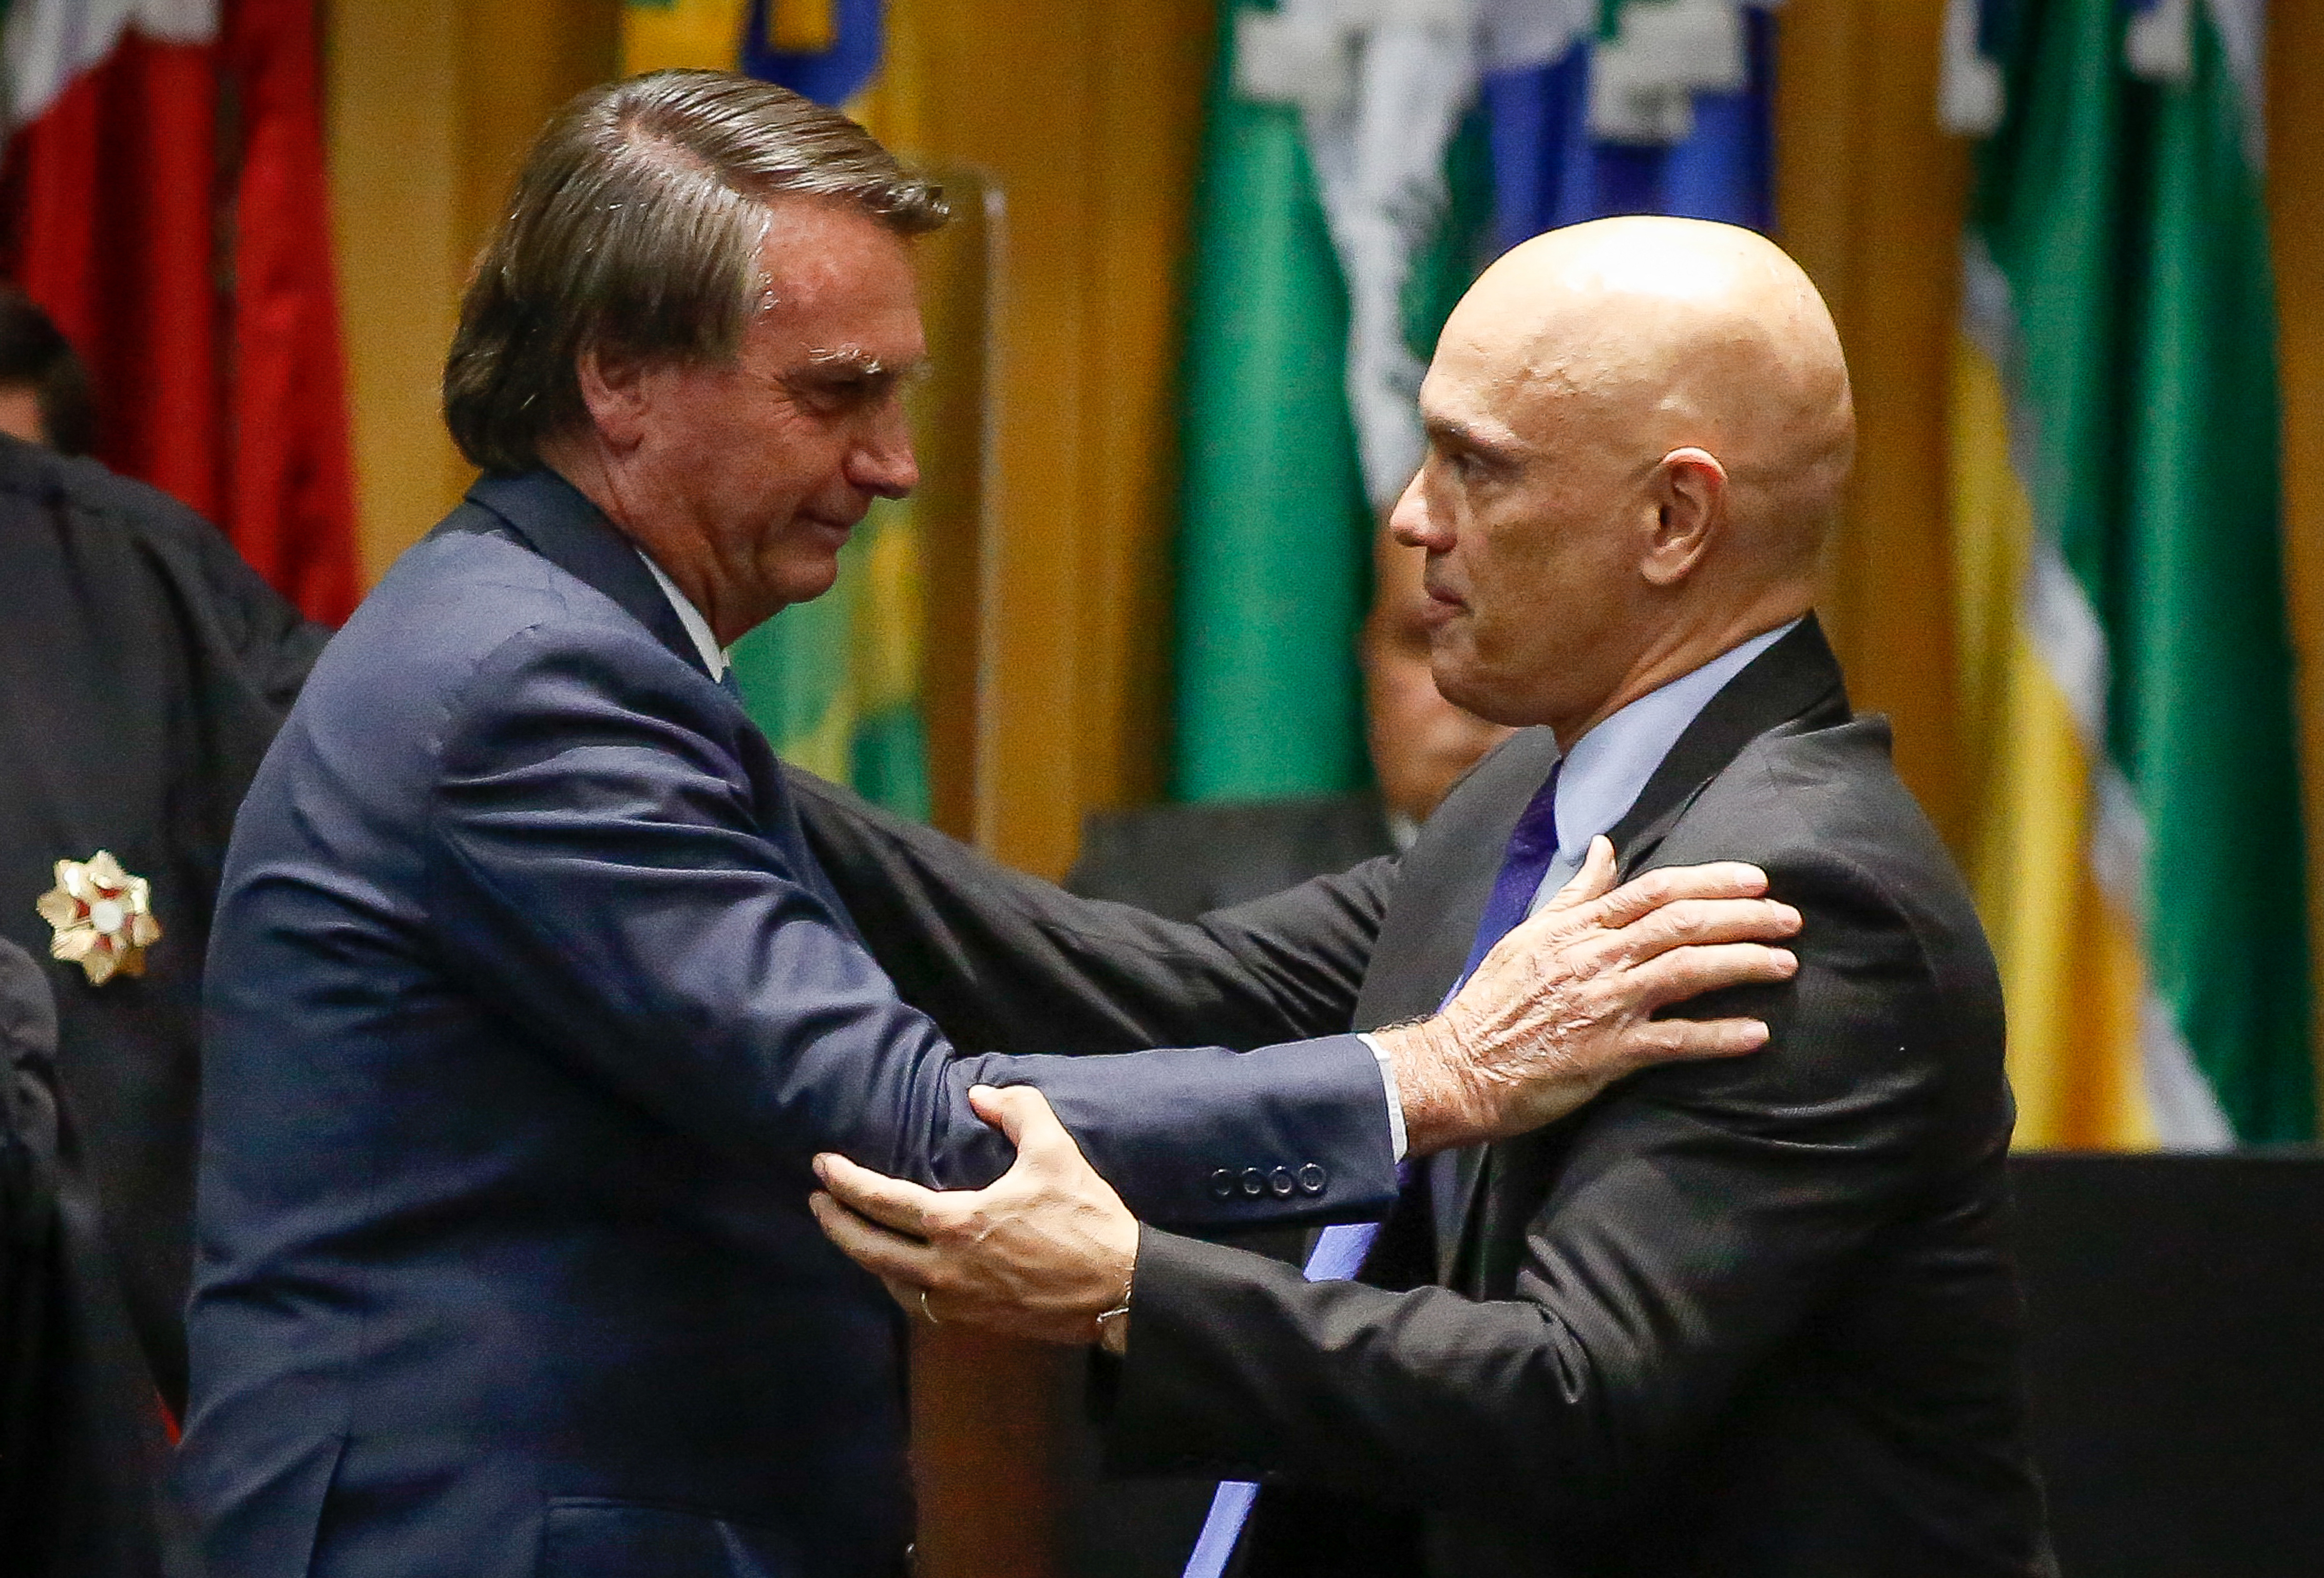 Brazil's President Jair Bolsonaro (L) greets Judge Alexandre de Moraes during an inauguration ceremony of new judges of the Superior Labor Court in Brasilia, on May 19, 2022. (Photo by Sergio Lima / AFP)